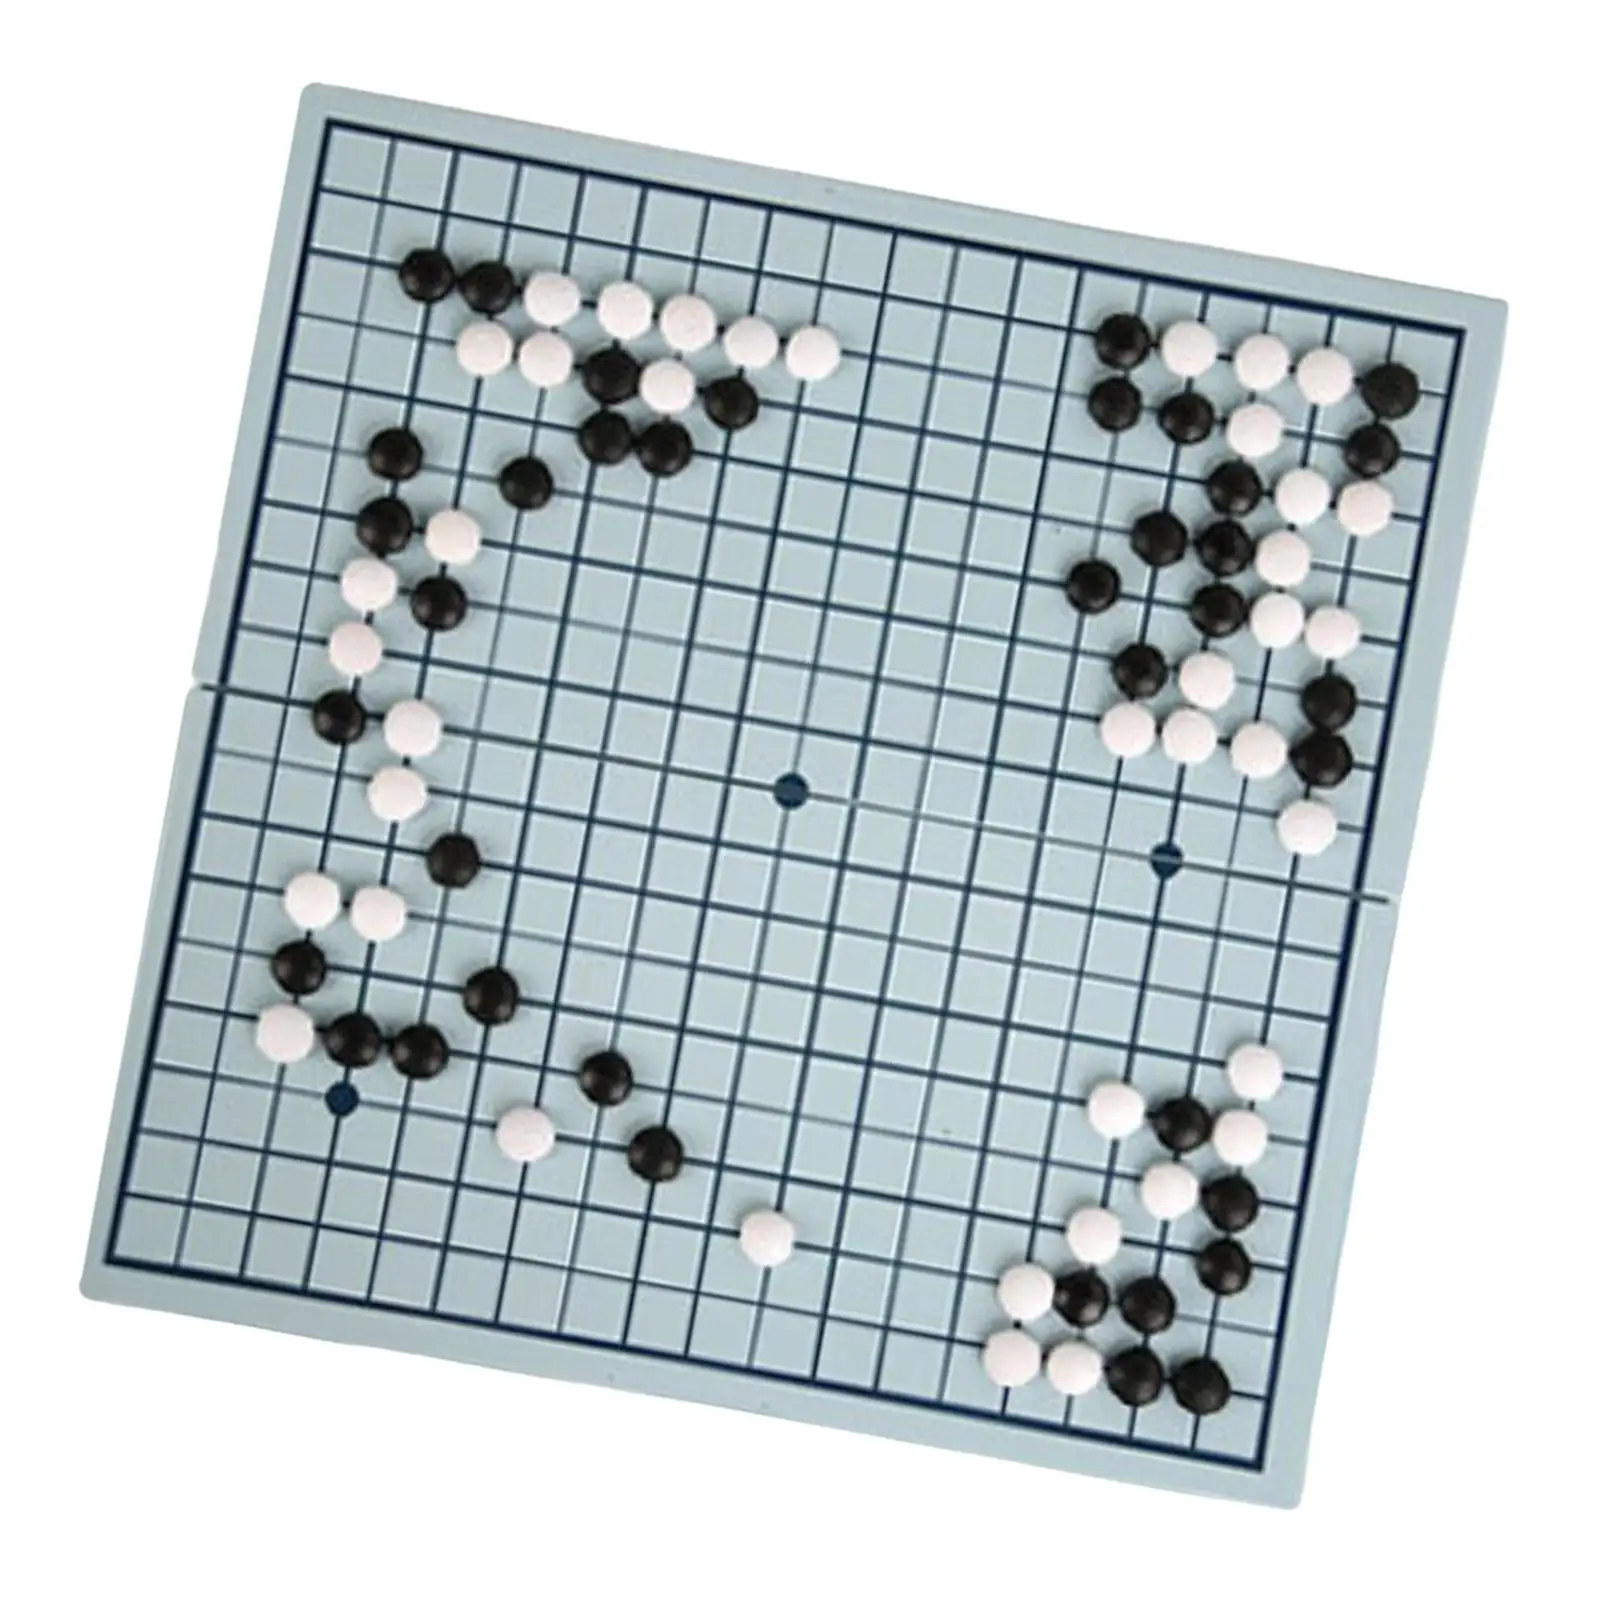 Traditional Go Set Foldable Board Classic Chinese Strategy Board Game for Two